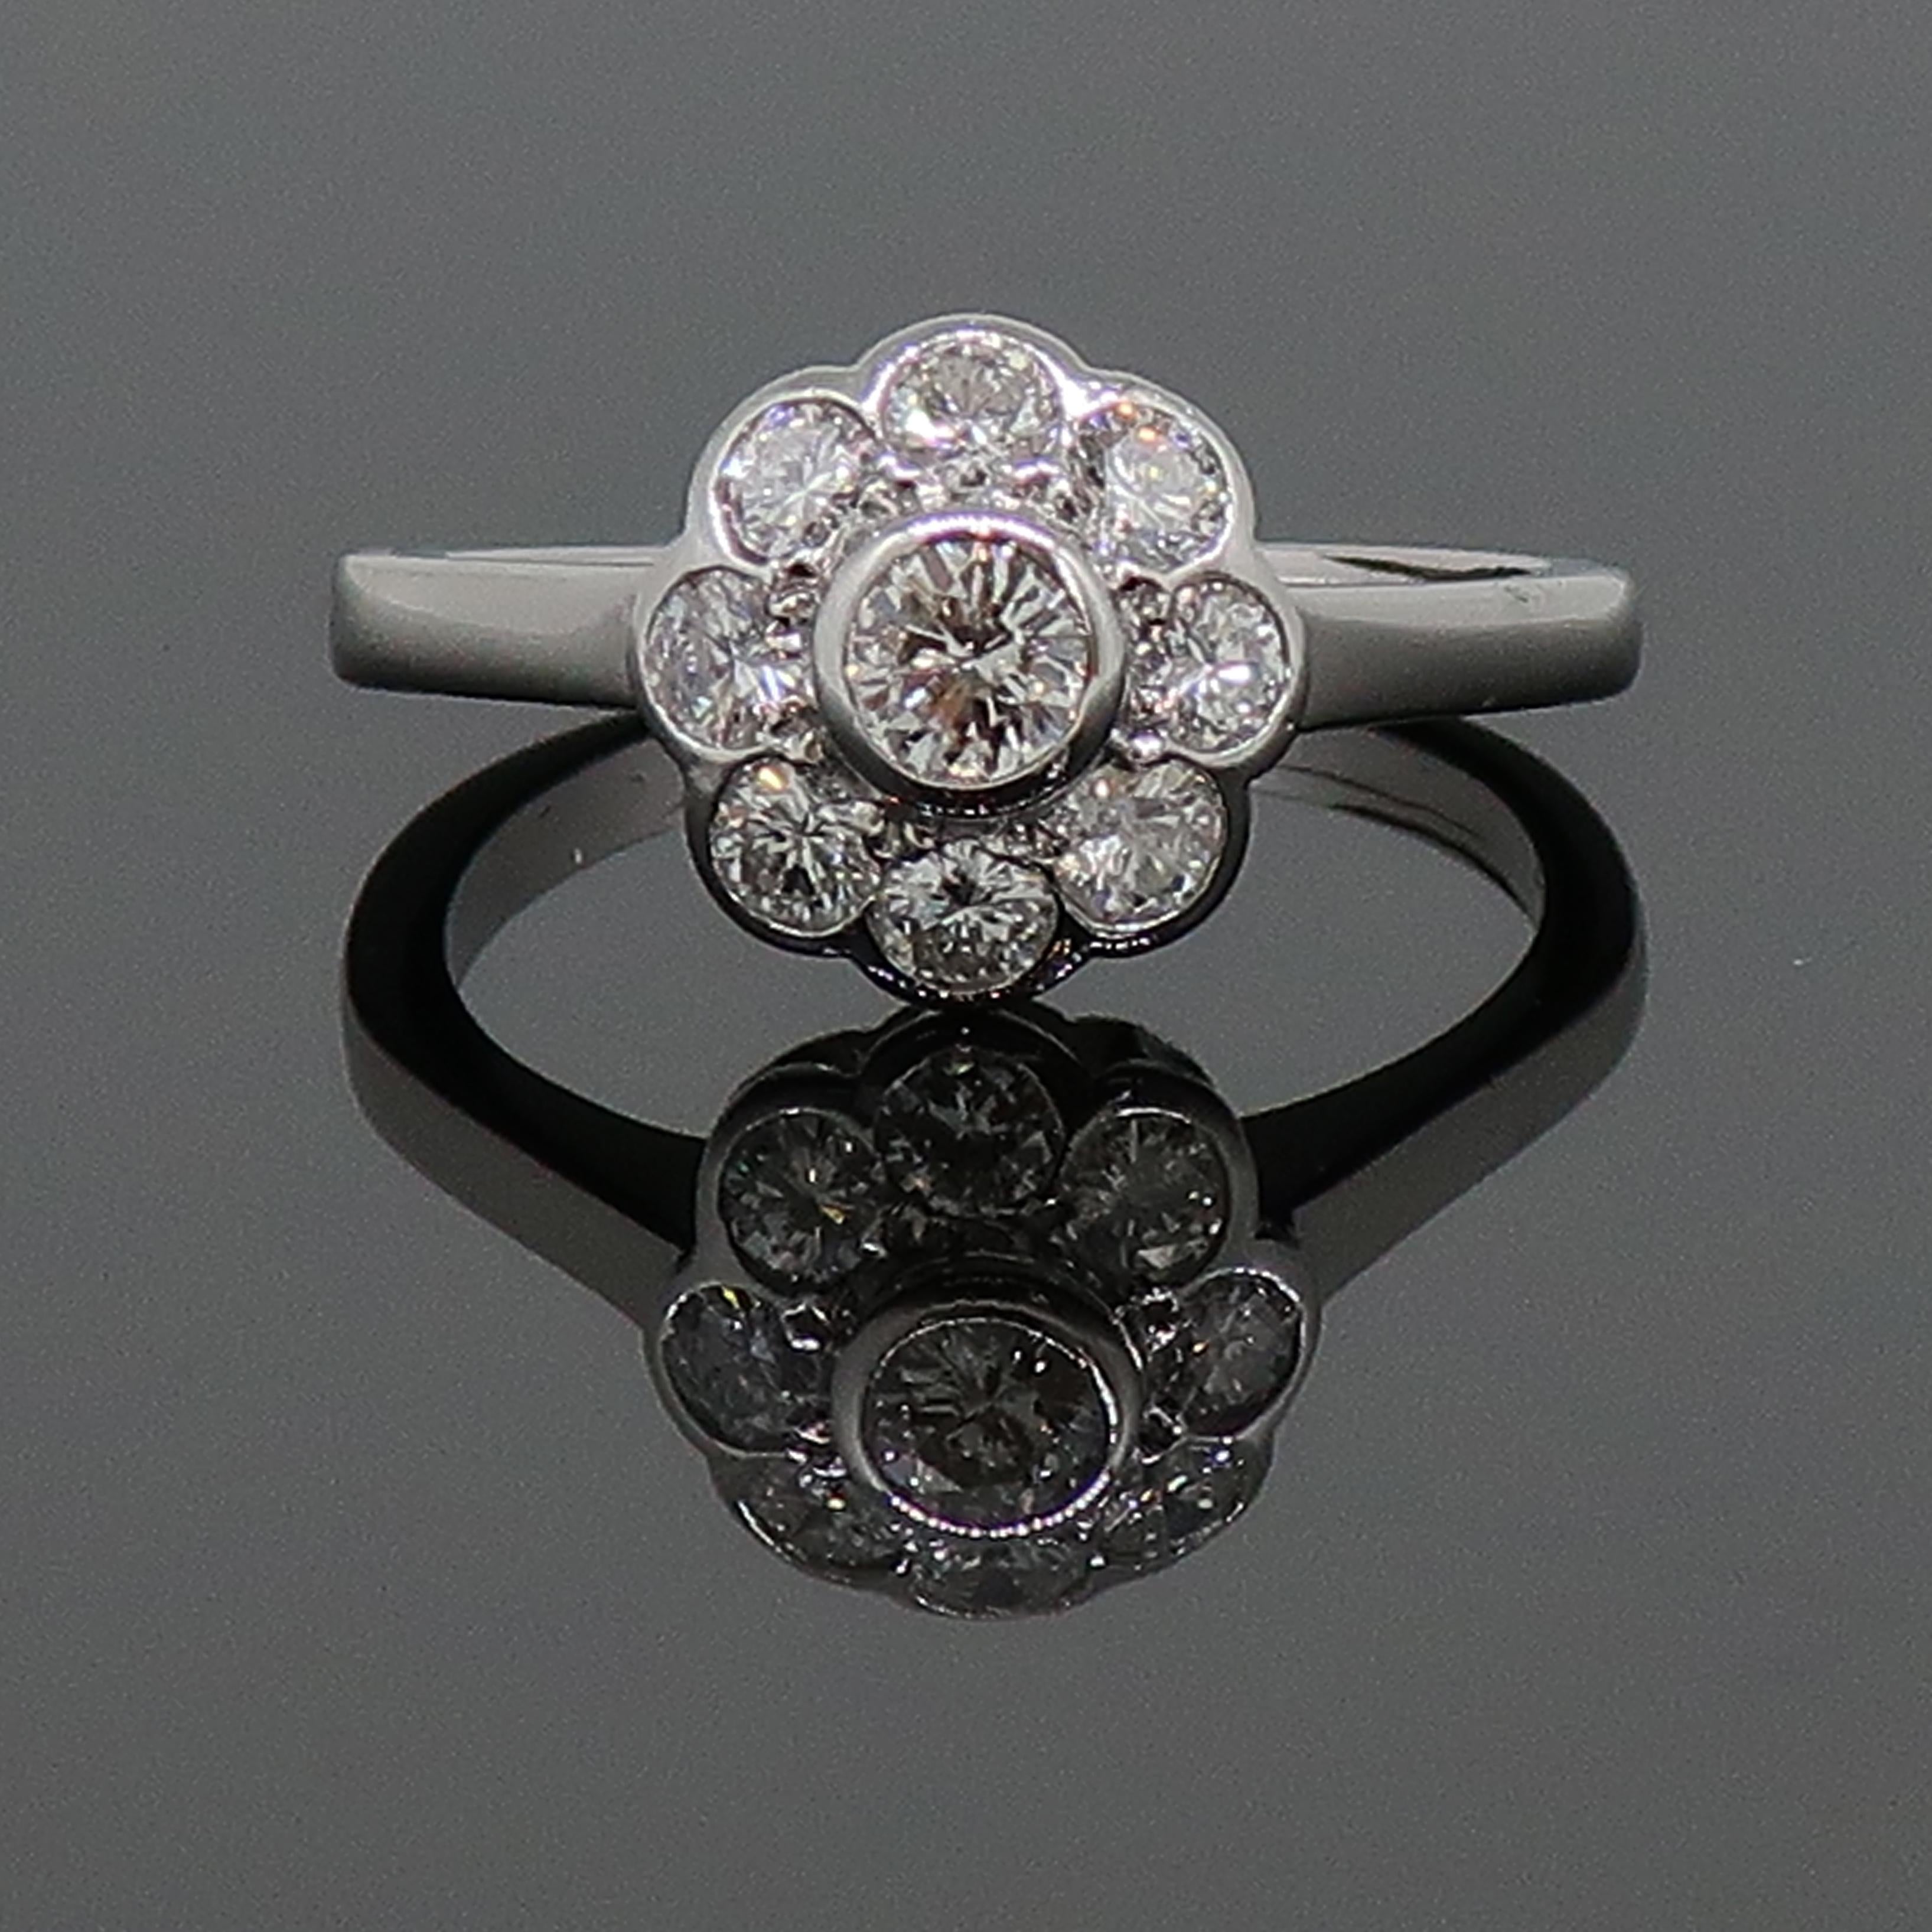 Brilliant Cut Diamond Daisy Cluster Ring

Classic daisy diamond cluster. Nine stone brilliant cut diamond daisy cluster ring. Central white diamond is larger than the eight outer diamonds, all stones set in a flush rub over setting. White metal,